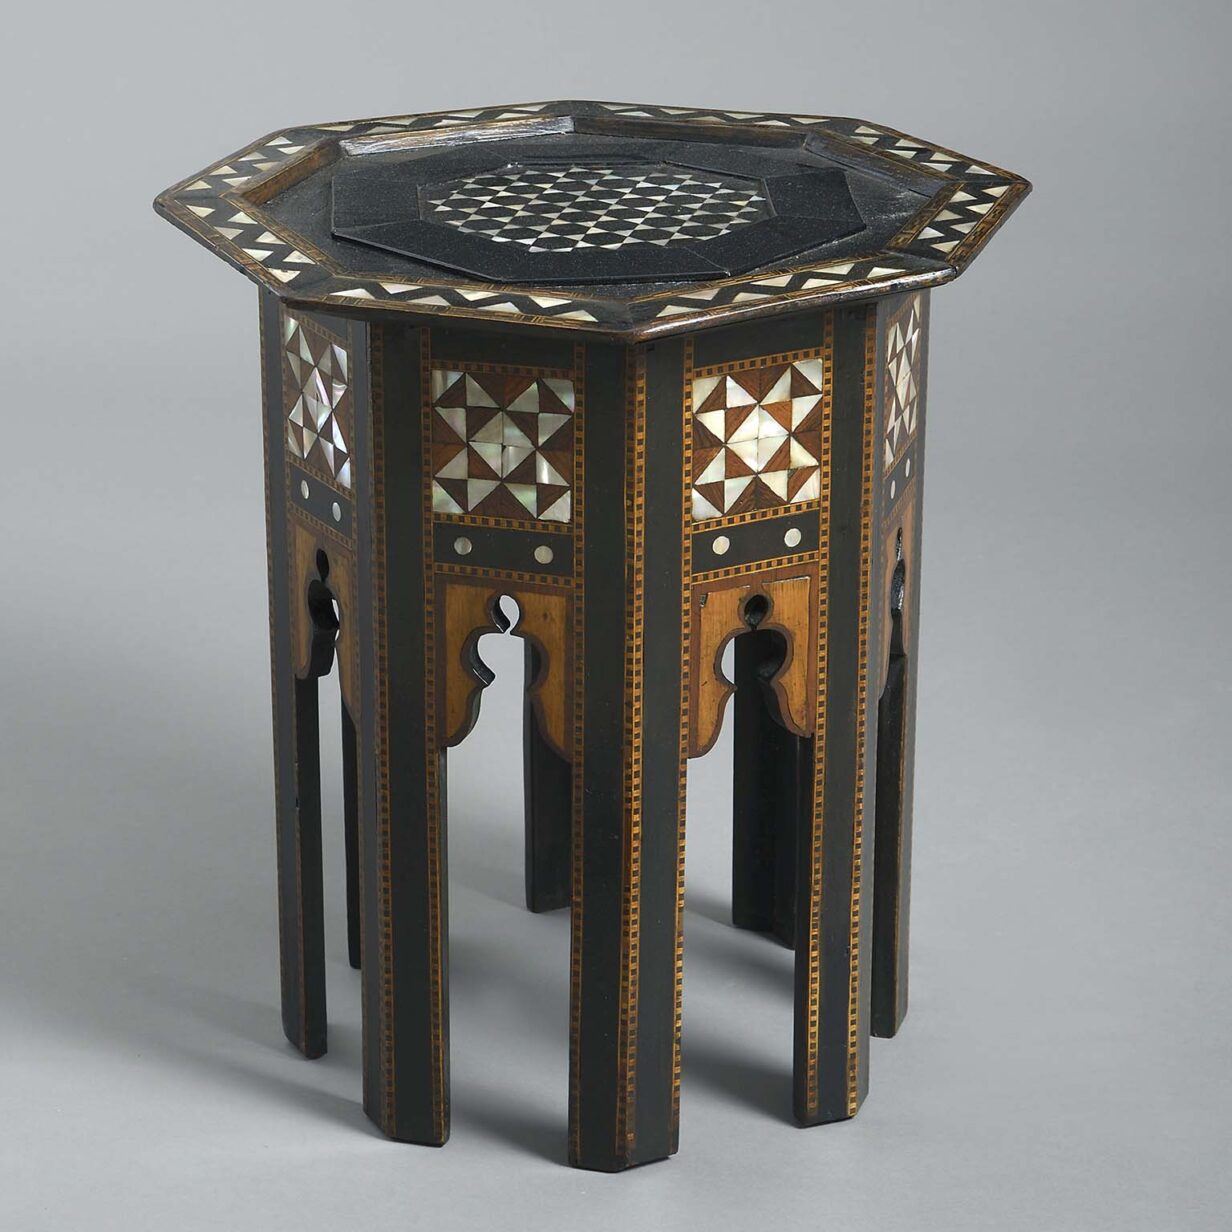 Late 19th century octagonal mother of pearl inlaid occasional table